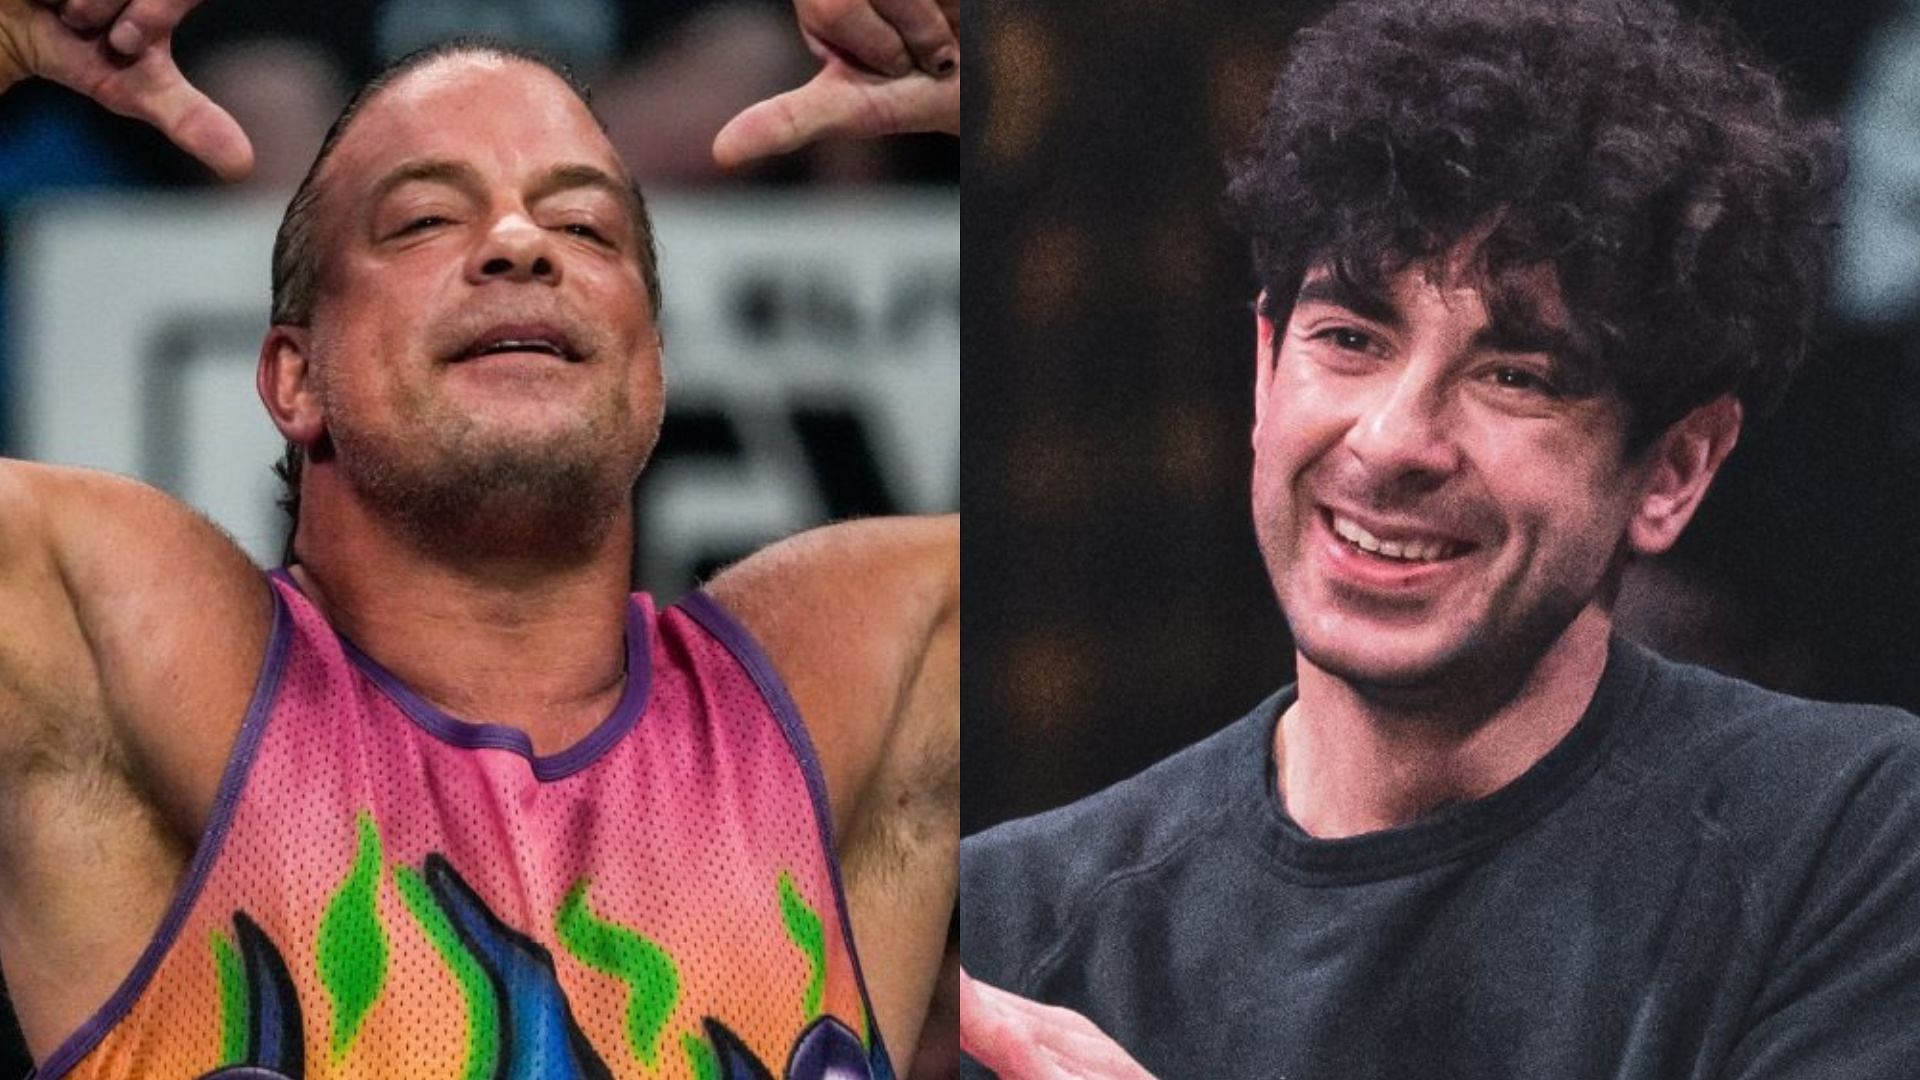 Why would Tony Khan be so happy to have RVD in AEW?